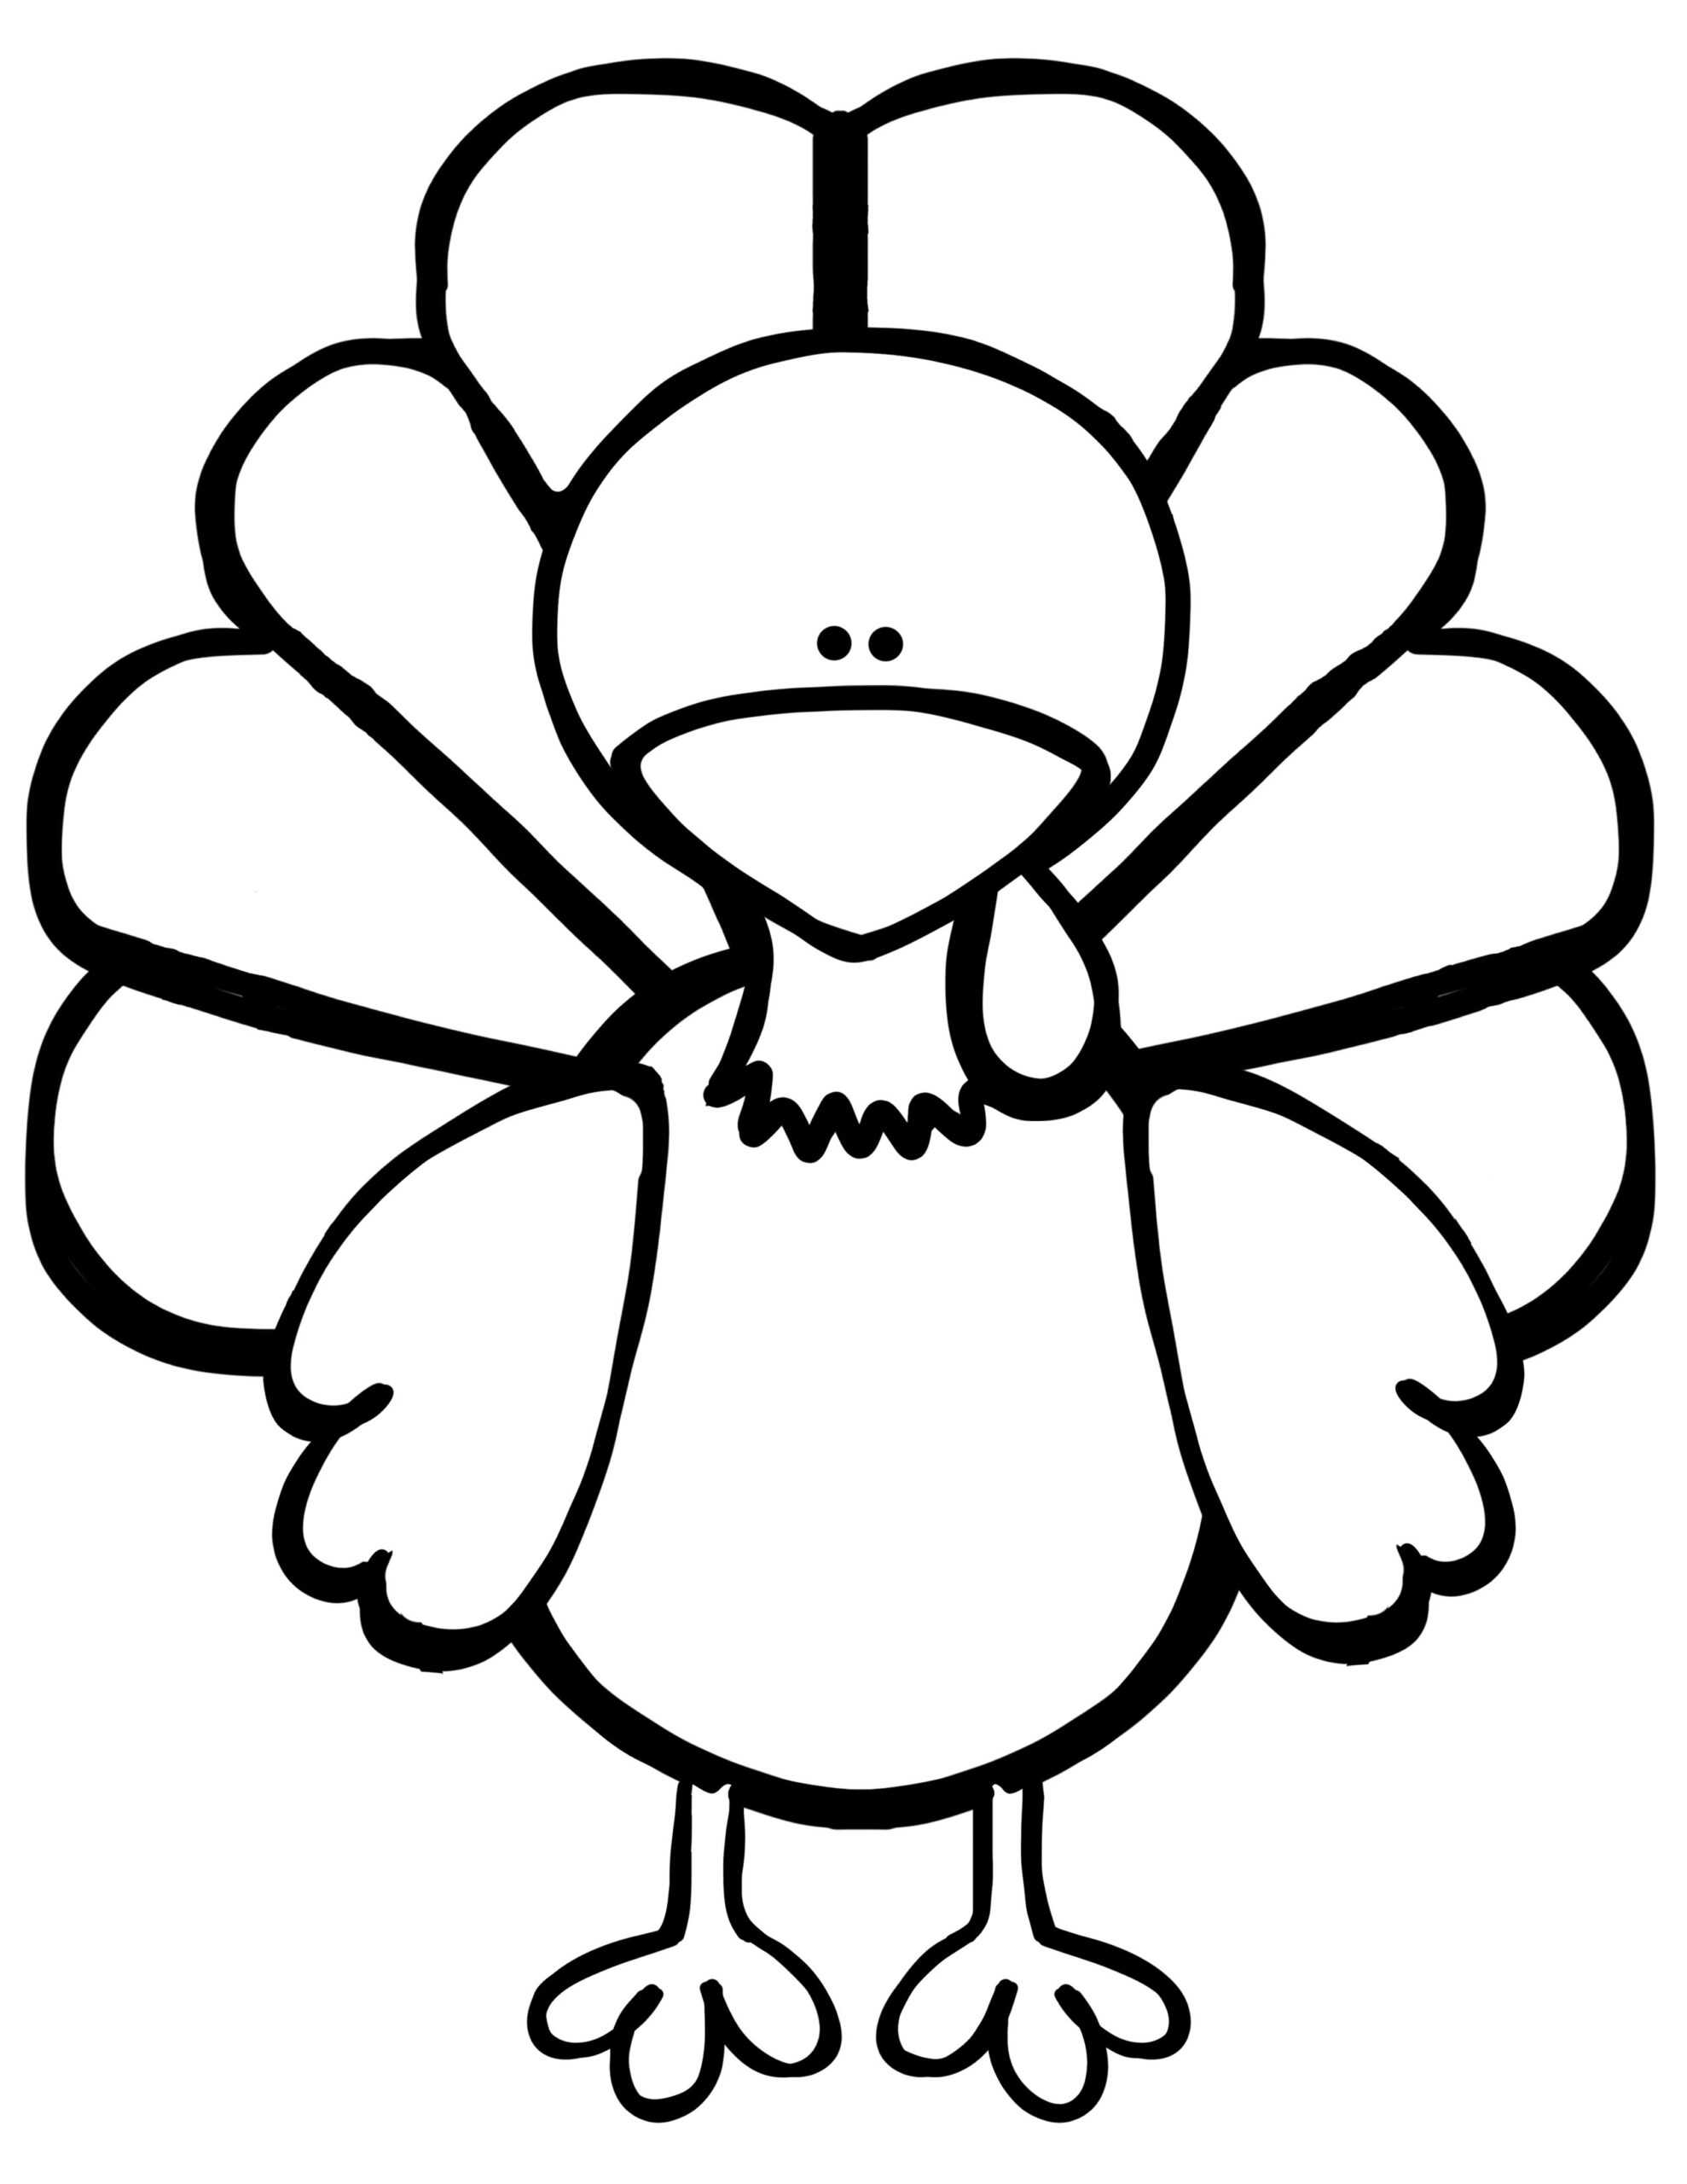 Everything You Need For The Turkey Disguise Project – Kids In Blank Turkey Template